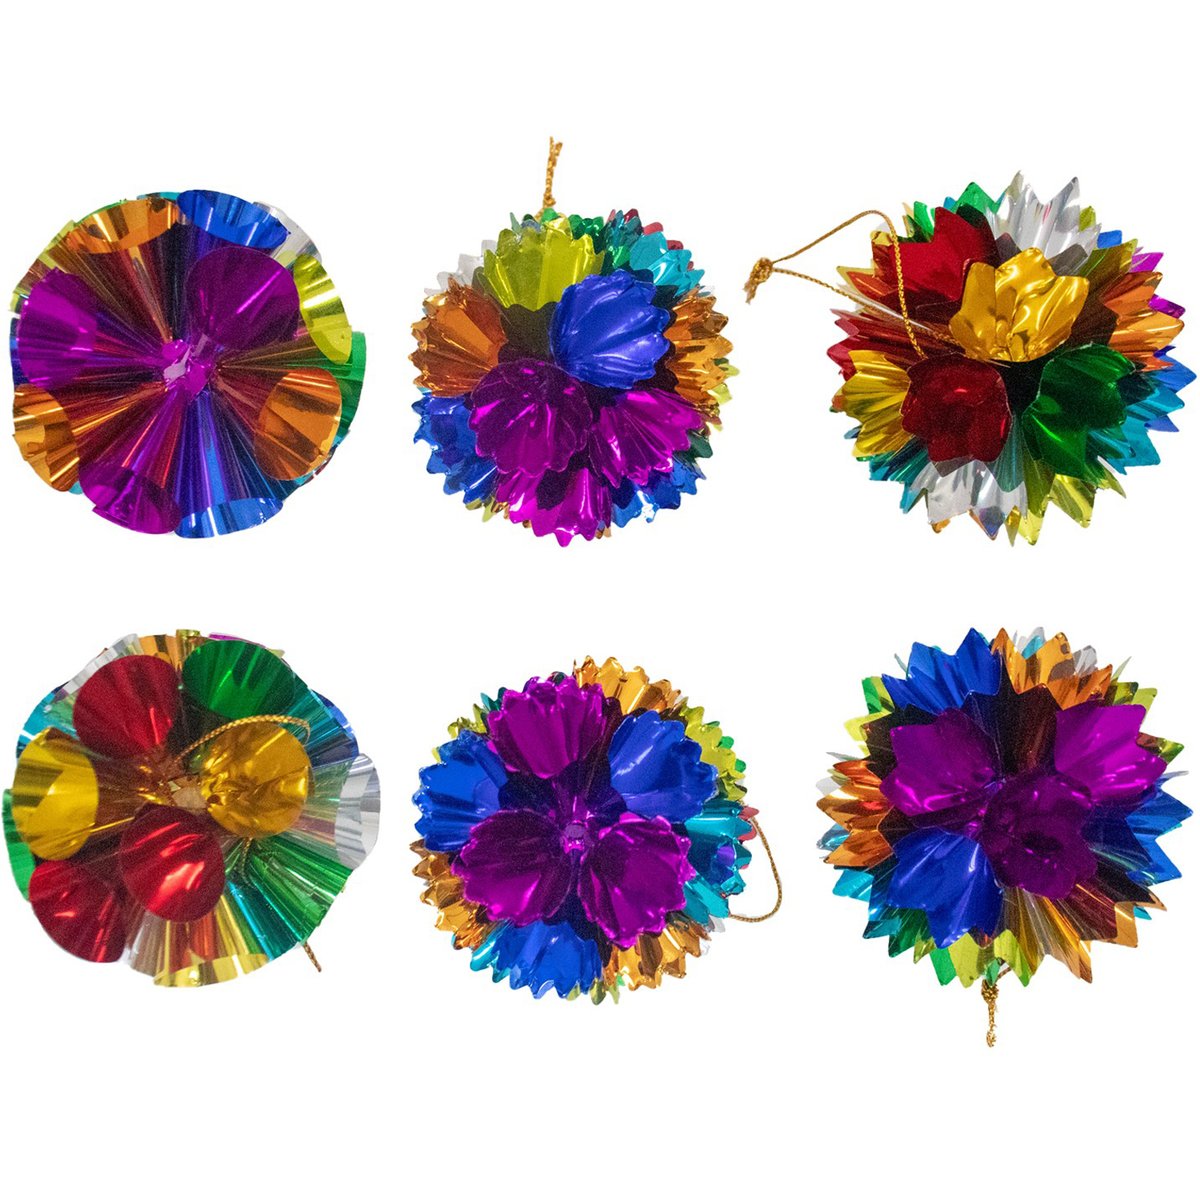 Siam Xmas Tinsel Ball 6s Assorted